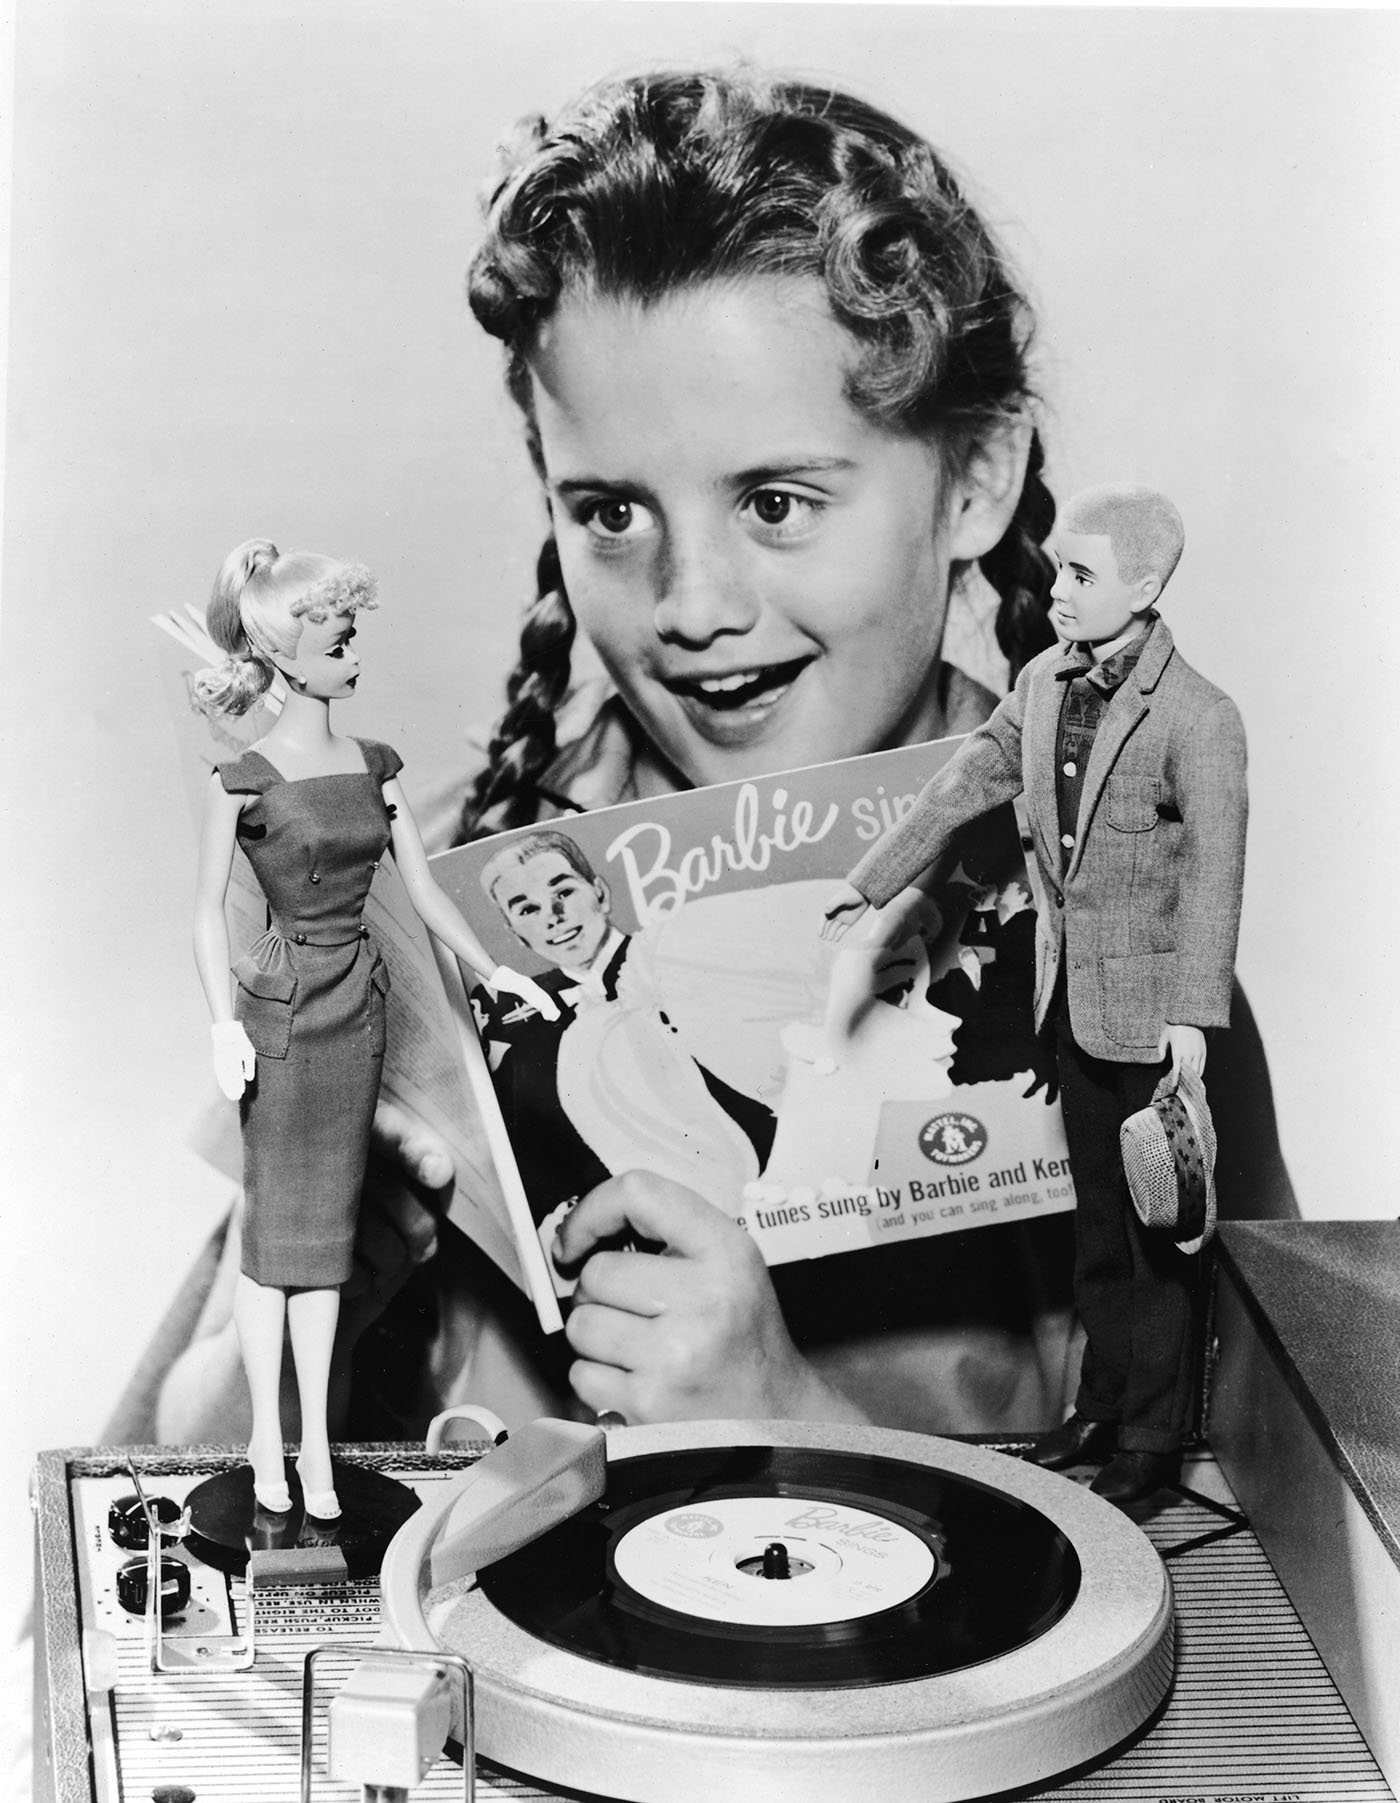 A girl in pigtails sings along with a 7" record called 'Barbie Sings' which plays on a portable phonograph player in 1961. Two dolls, Barbie and Ken, stand on the phonograph.